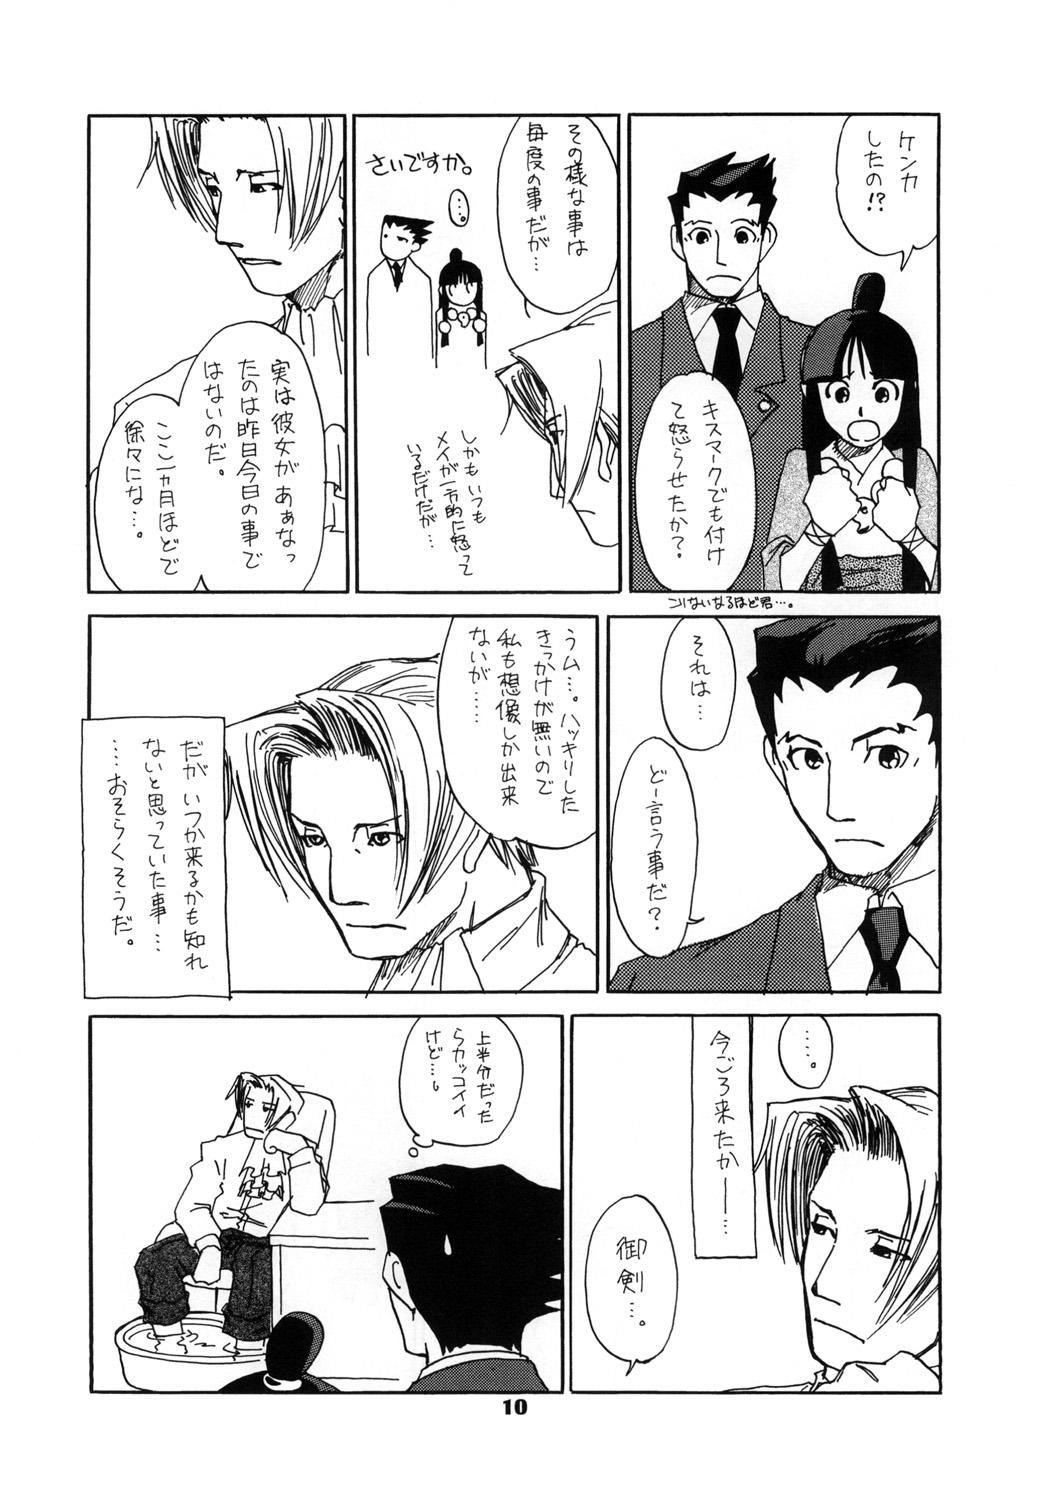 Ejaculation RxM DX 2 - Ace attorney Game - Page 10